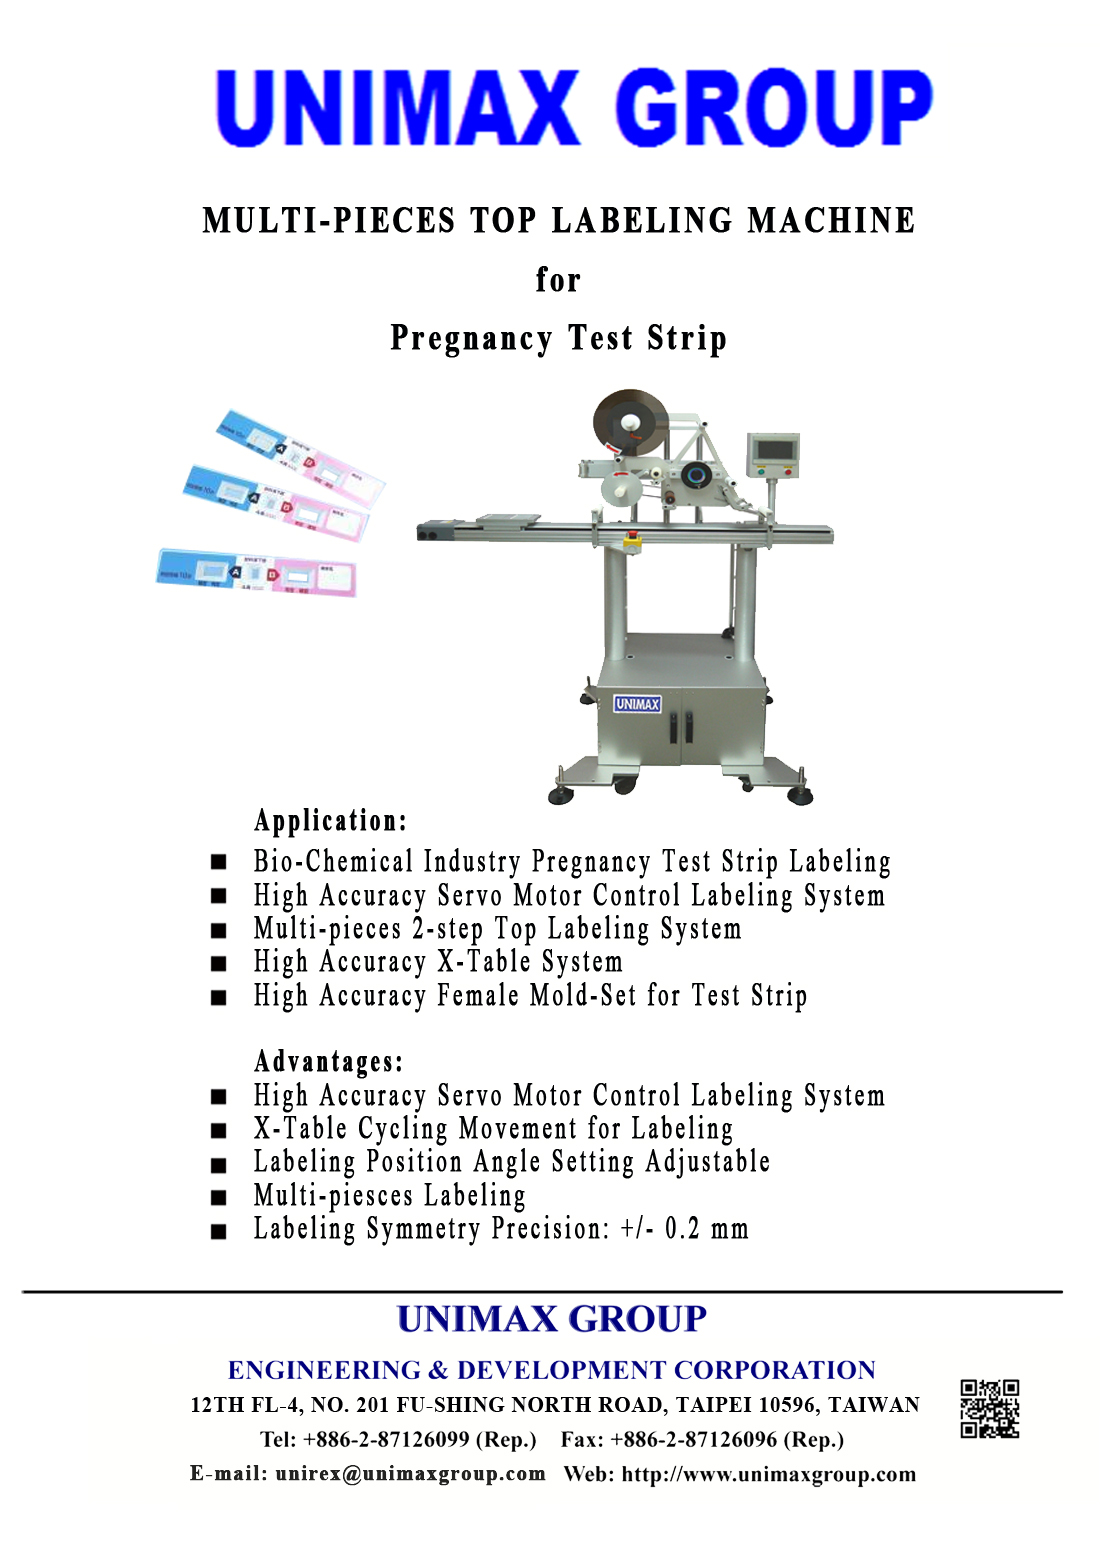 Multi-Pieces Top Labeling Machine for Pregnancy Test Strip